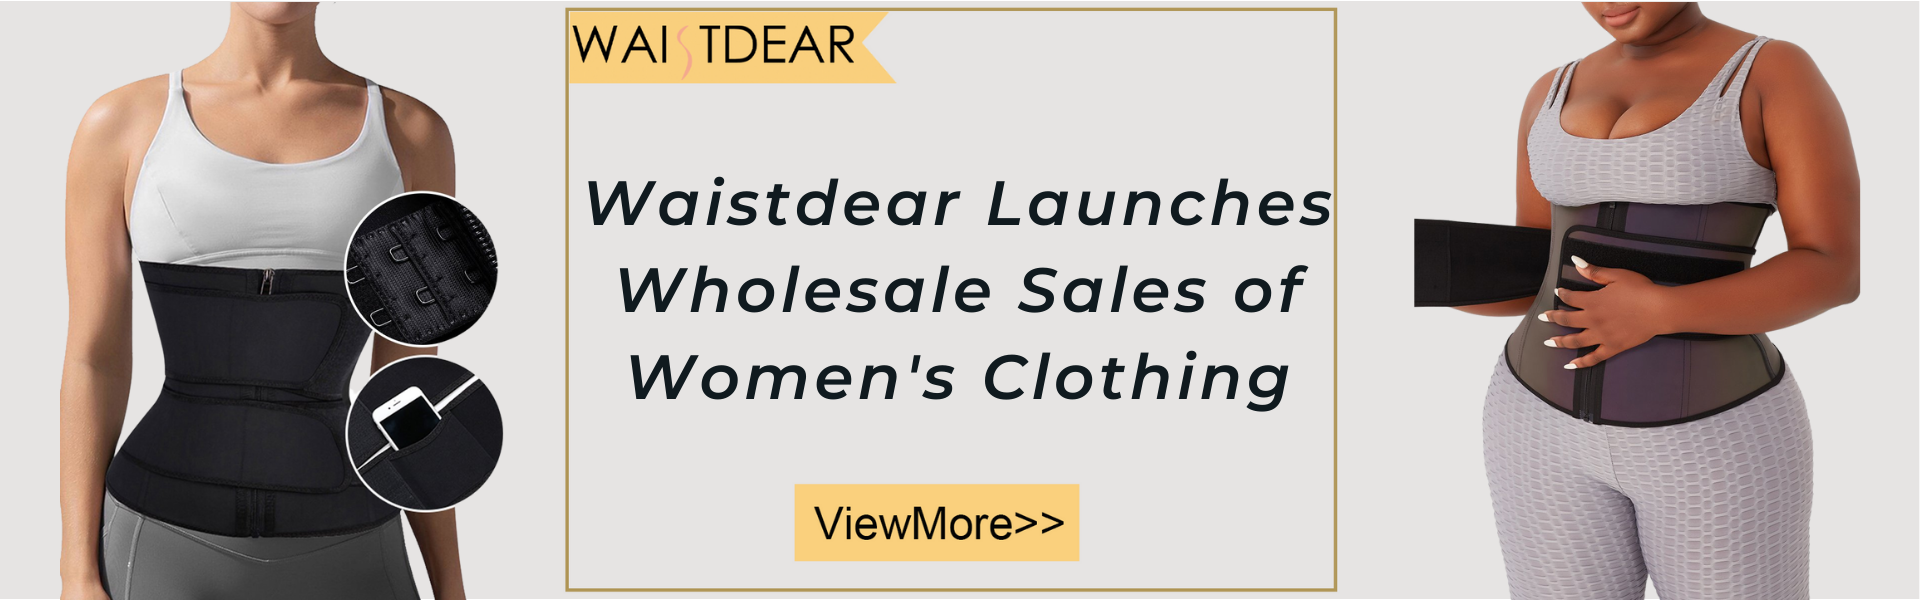 Waistdear Launches Wholesale Sales of Women's Clothing